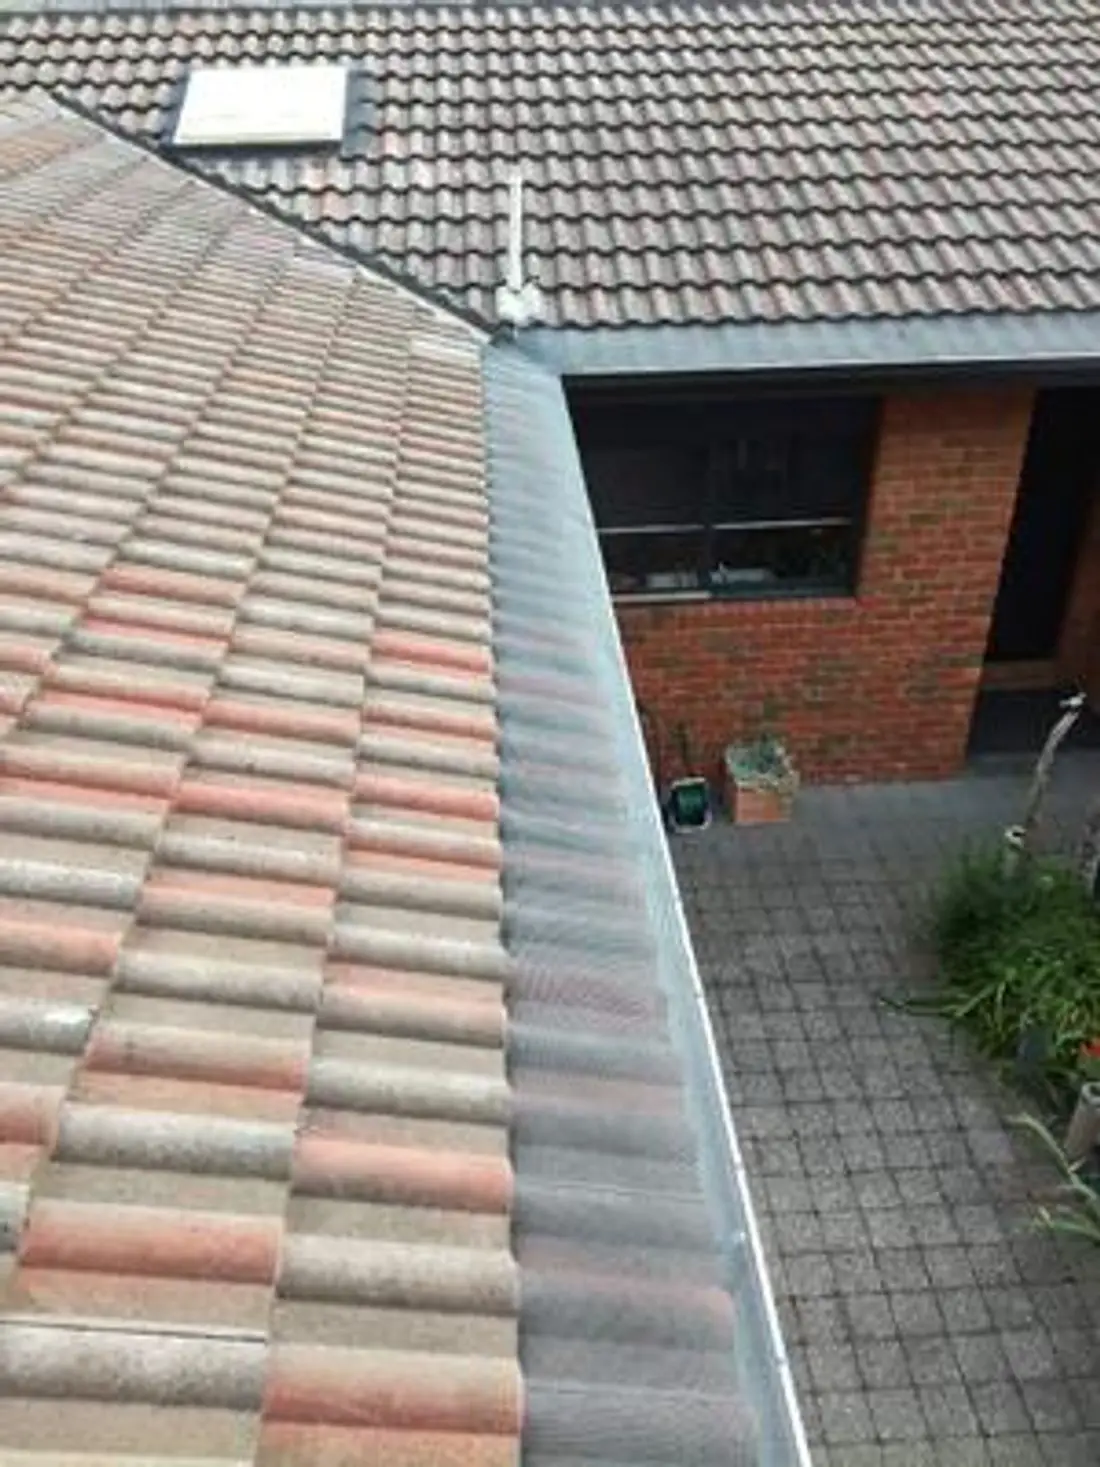 How To Install Gutter Guards on a Tiled Roof